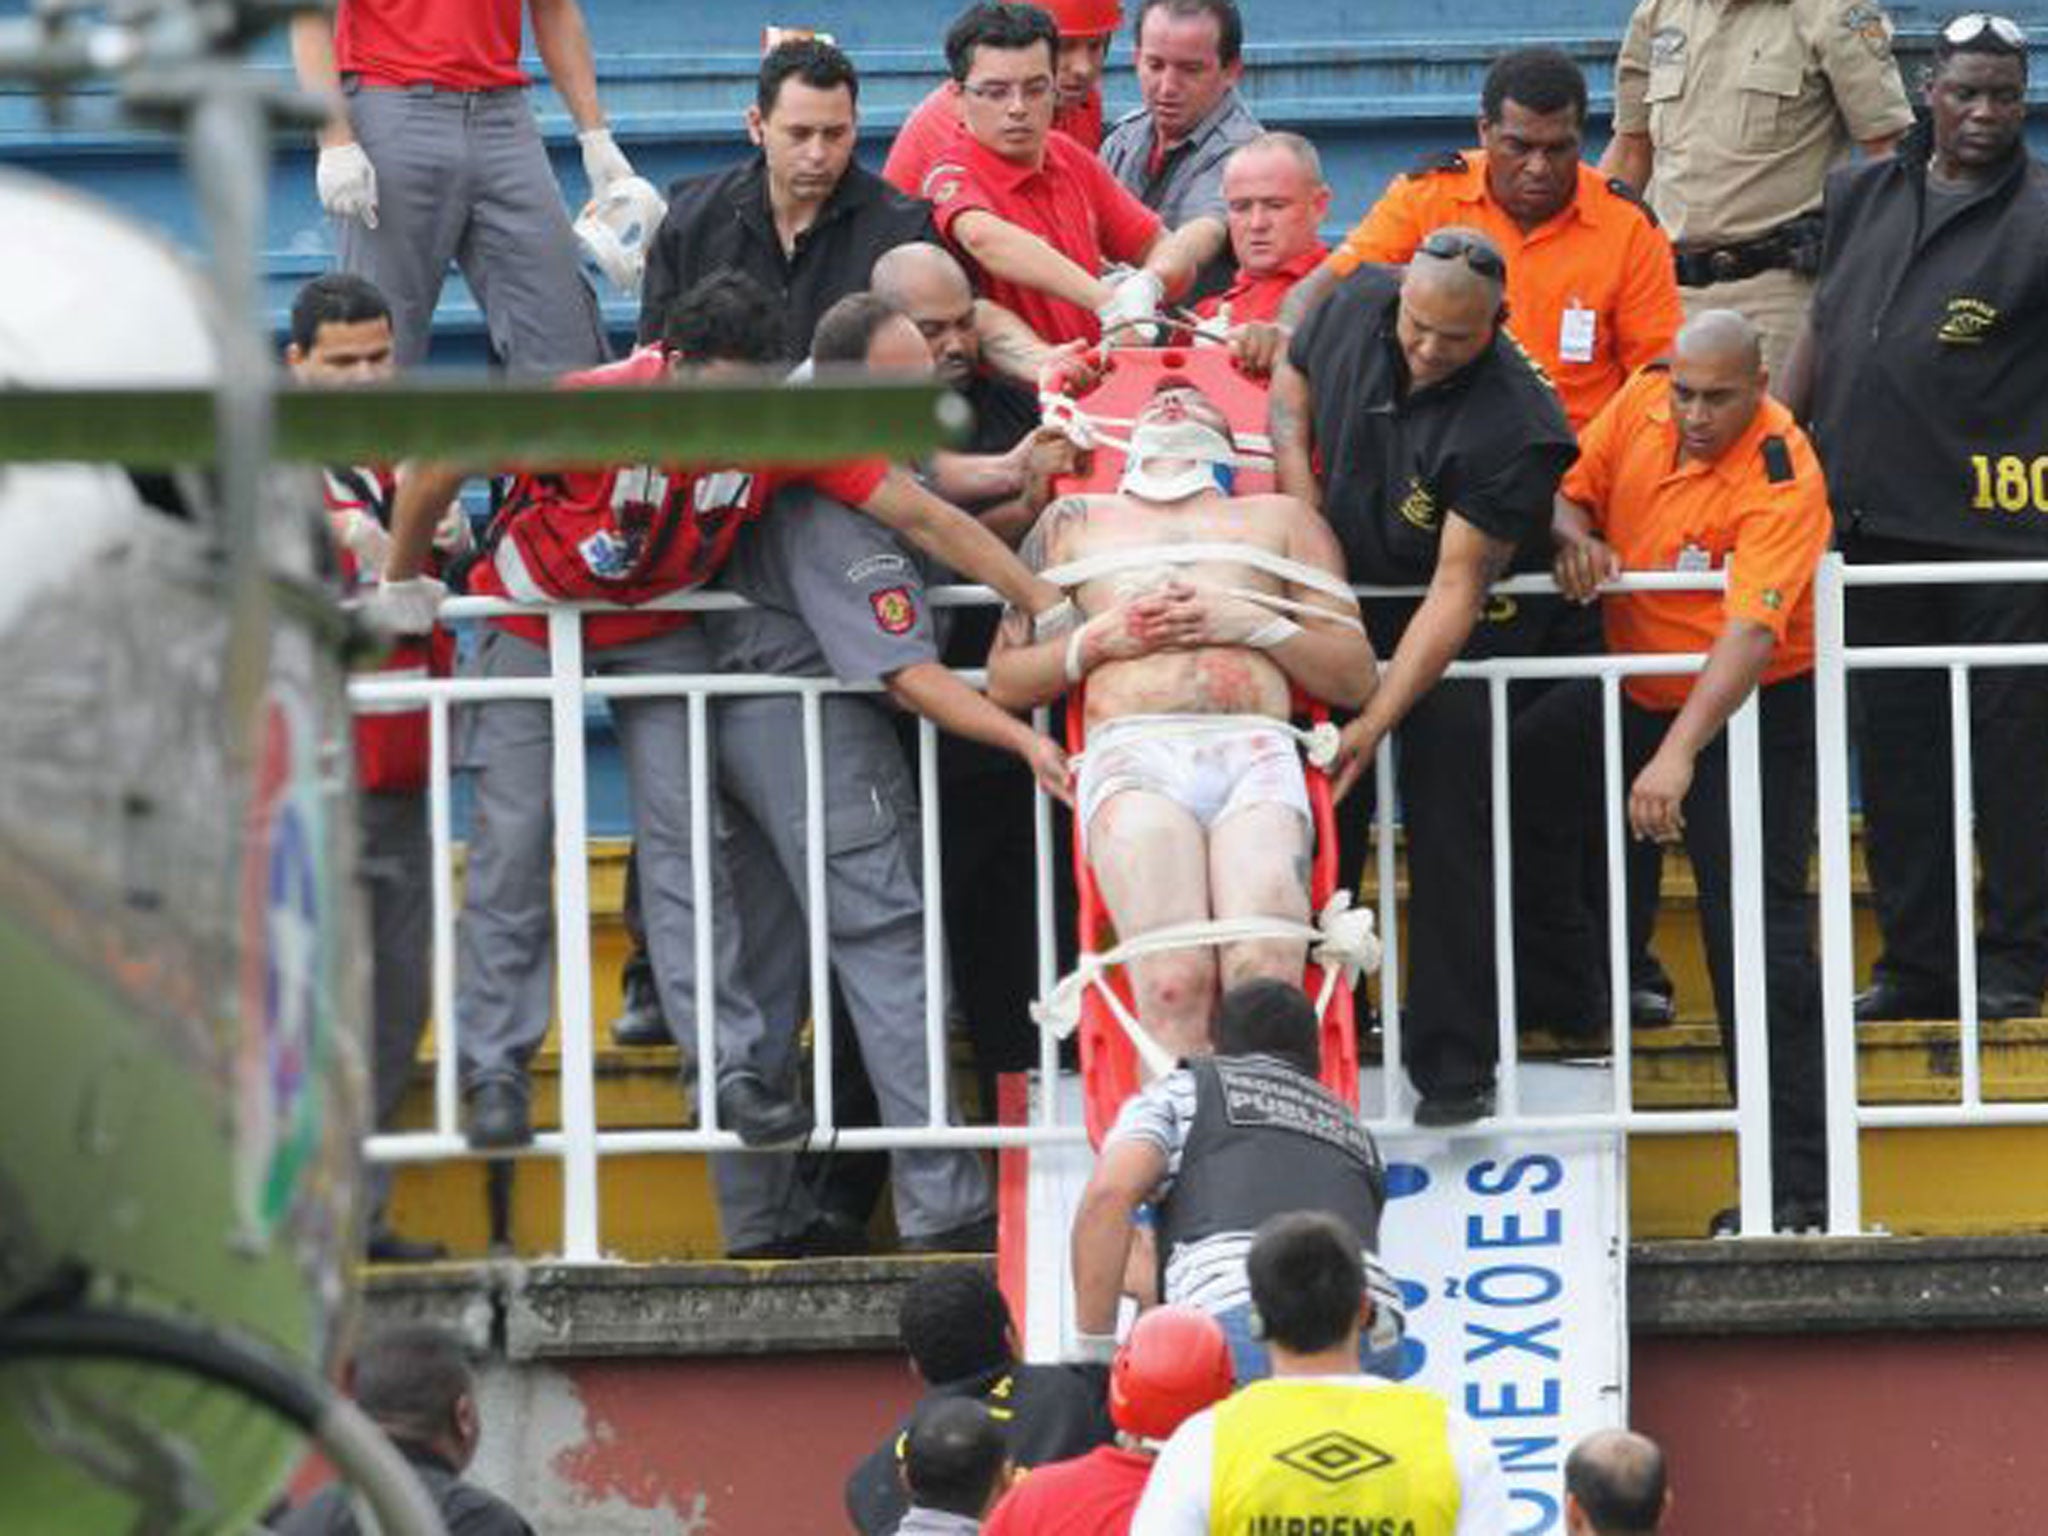 An injured fan is carried on a stretcher after clashes with team fans during a Brazilian league soccer match between Atletico Paranaense and Vasco da Gama in Joinville, southern Brazil on Sunday